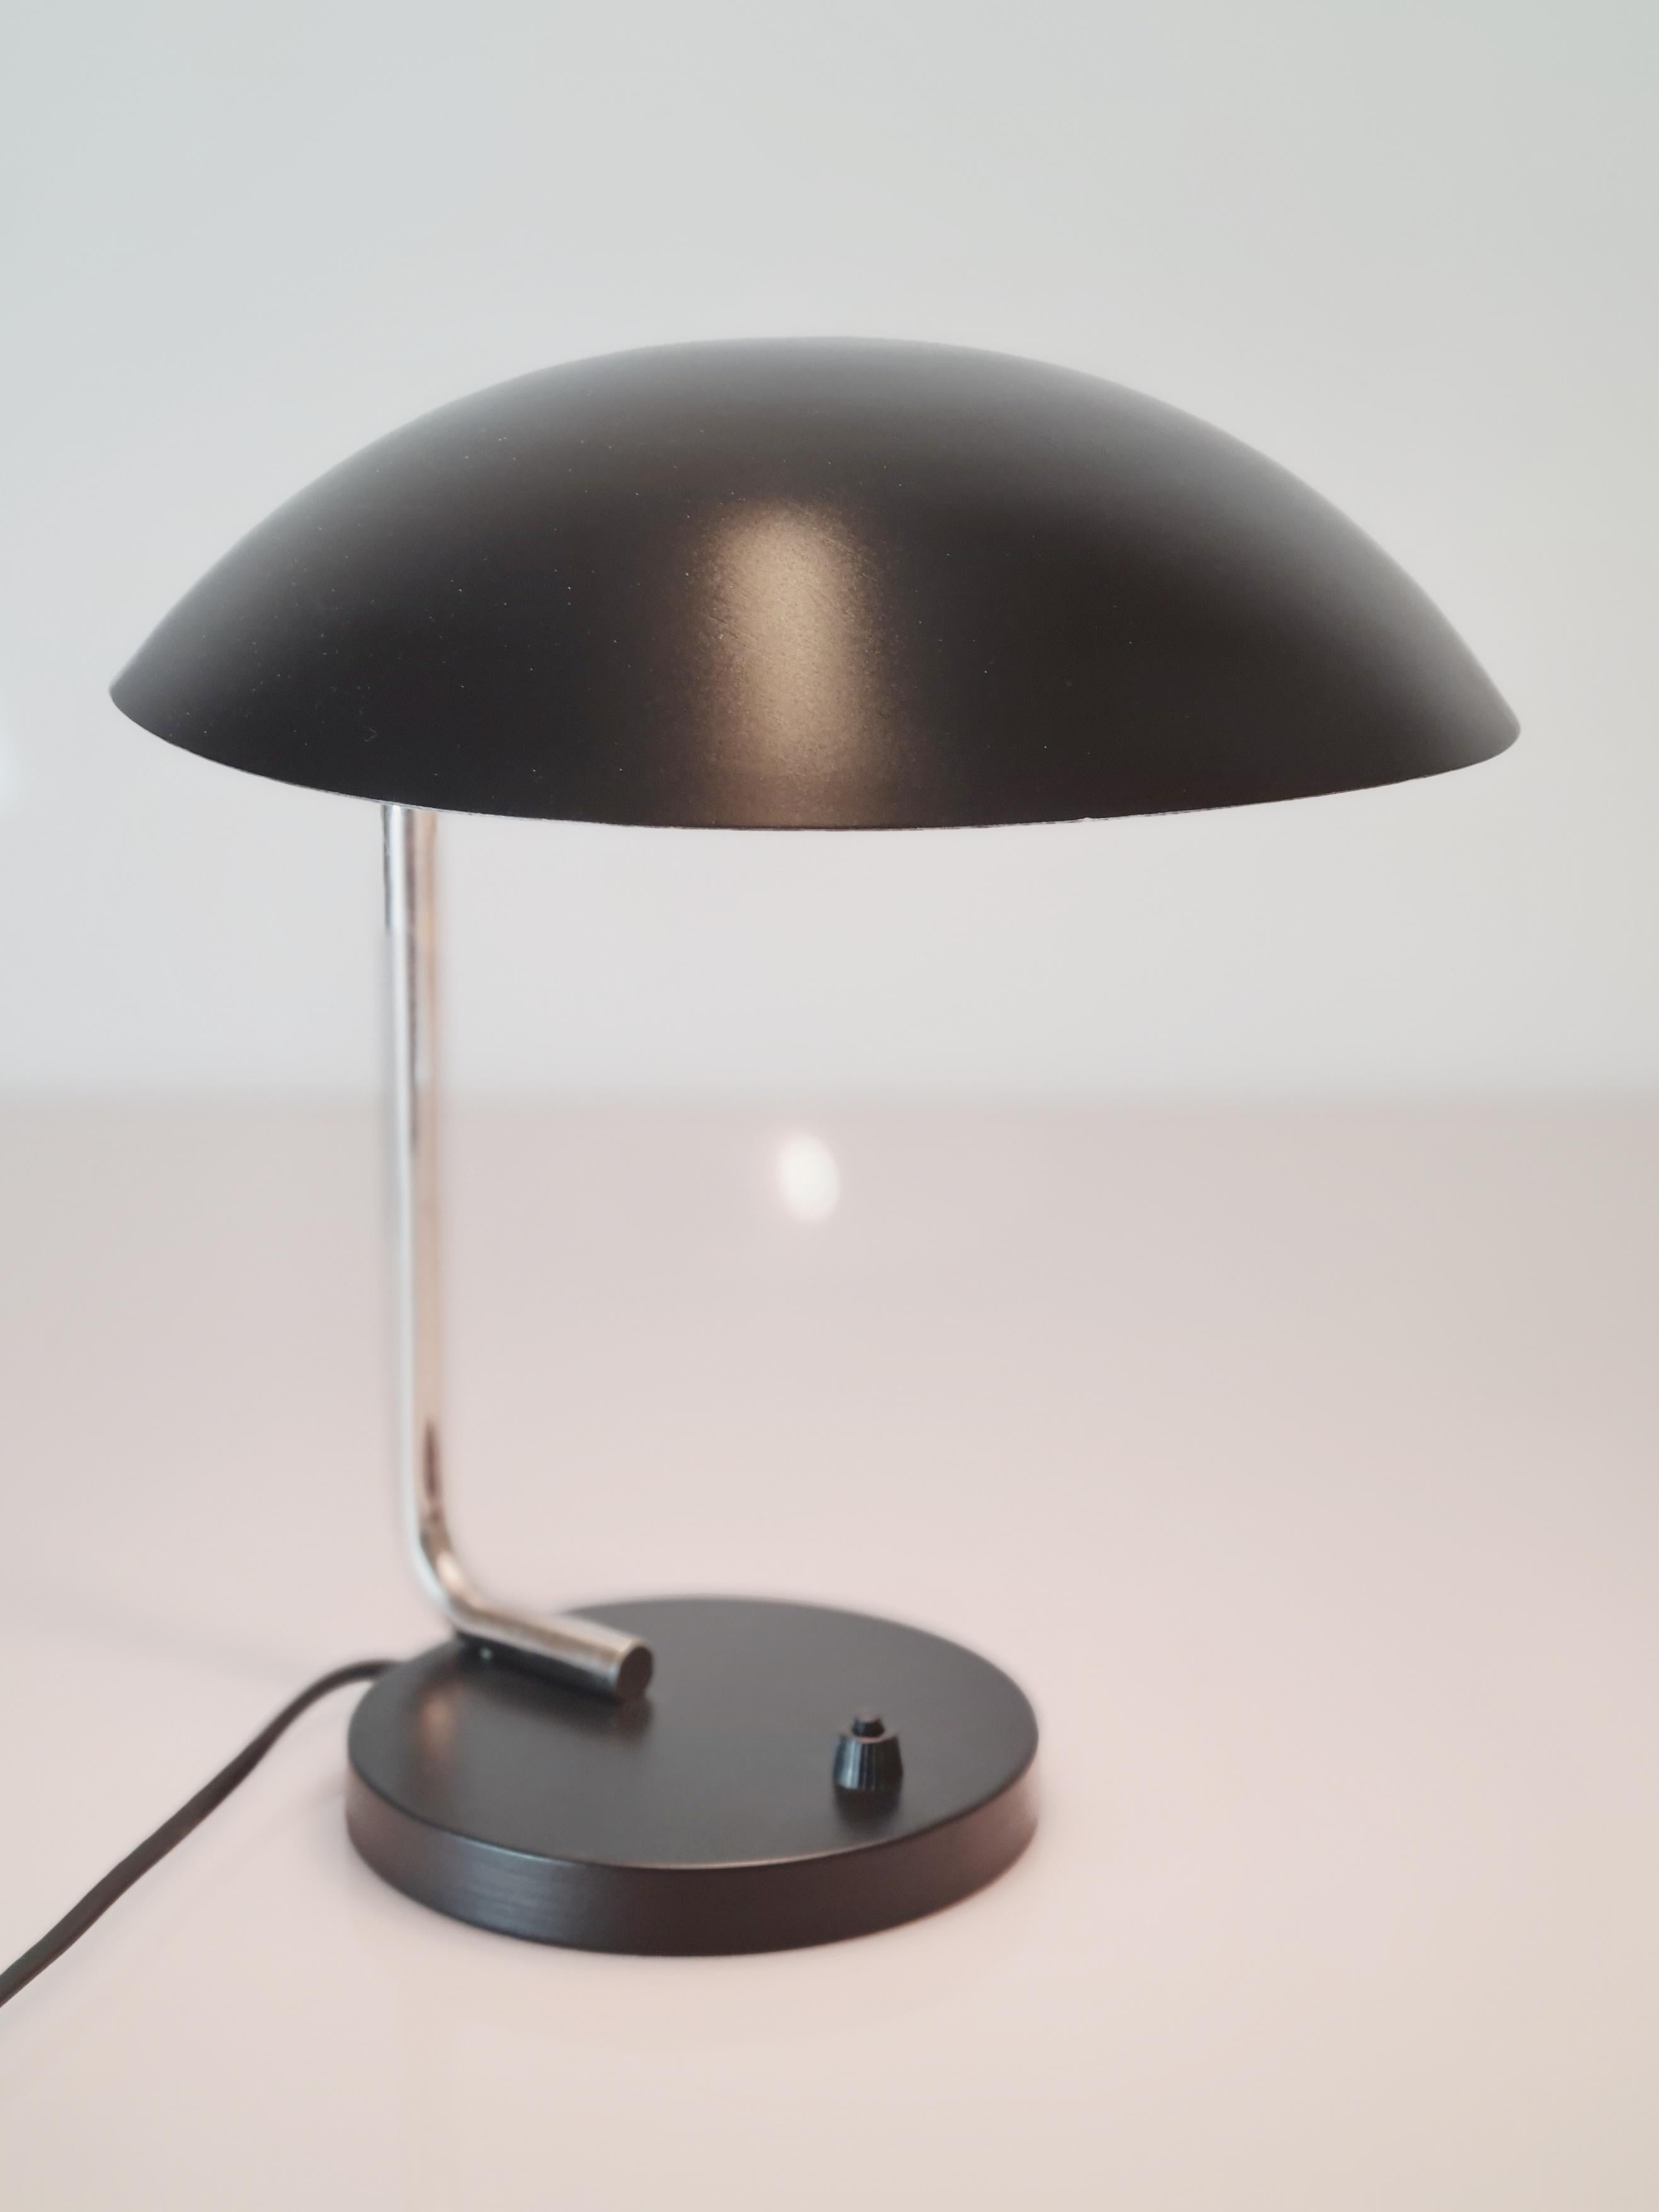 Metal Paavo Tynell Table Lamp Model 5310, Taito 1930s